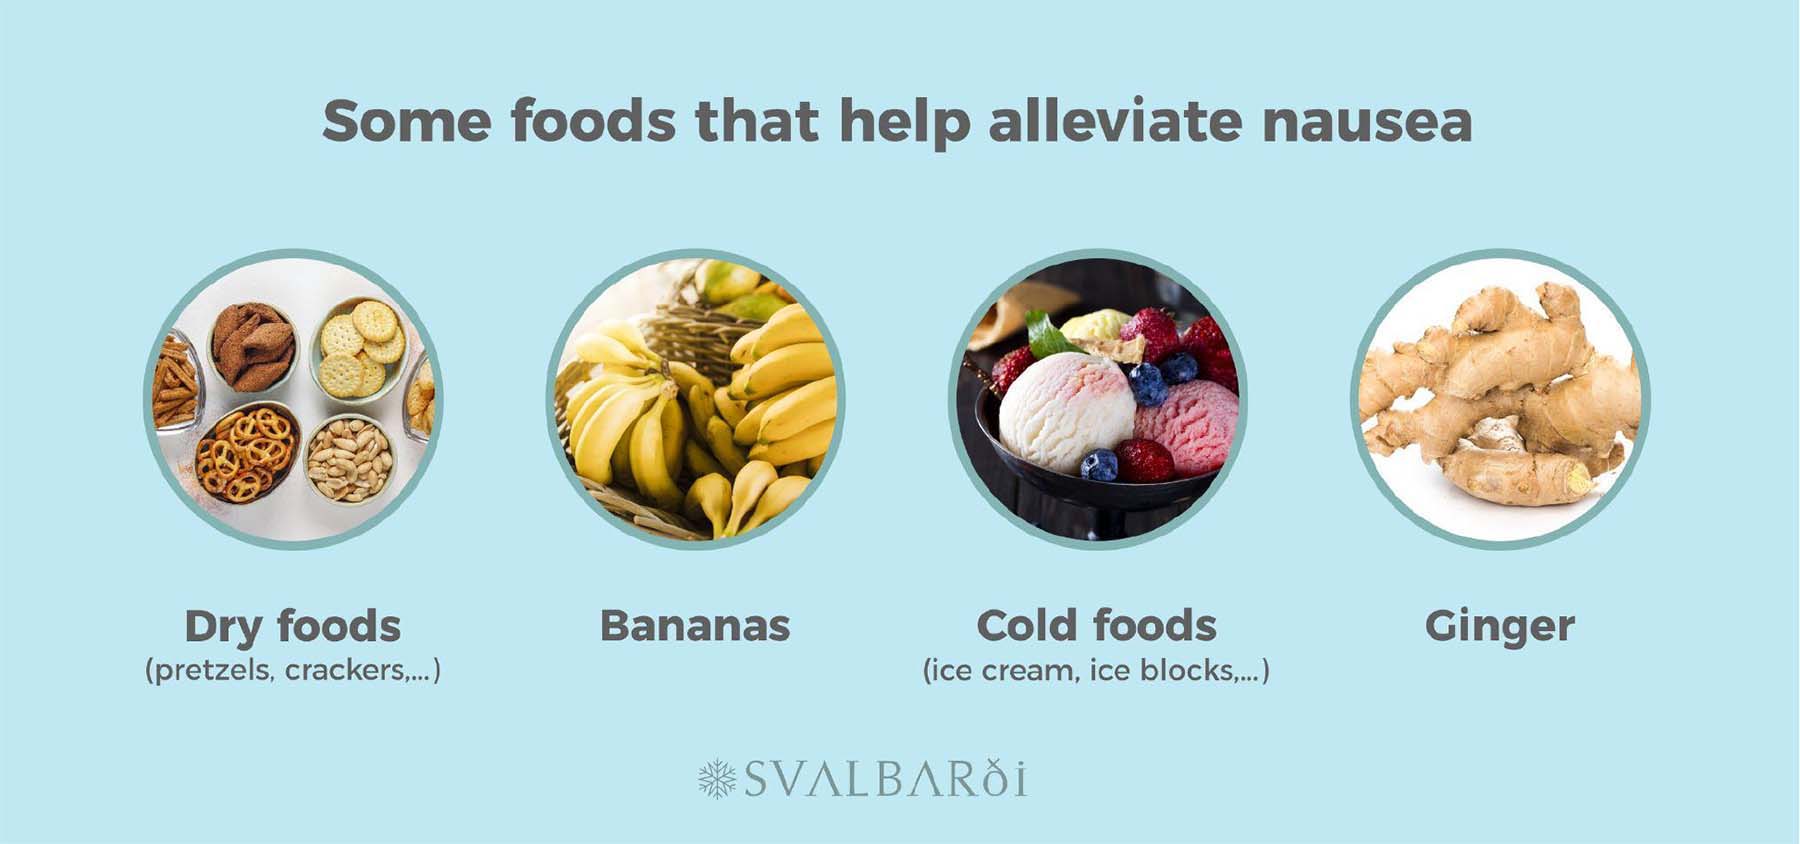 Beneficial Foods for Nausea